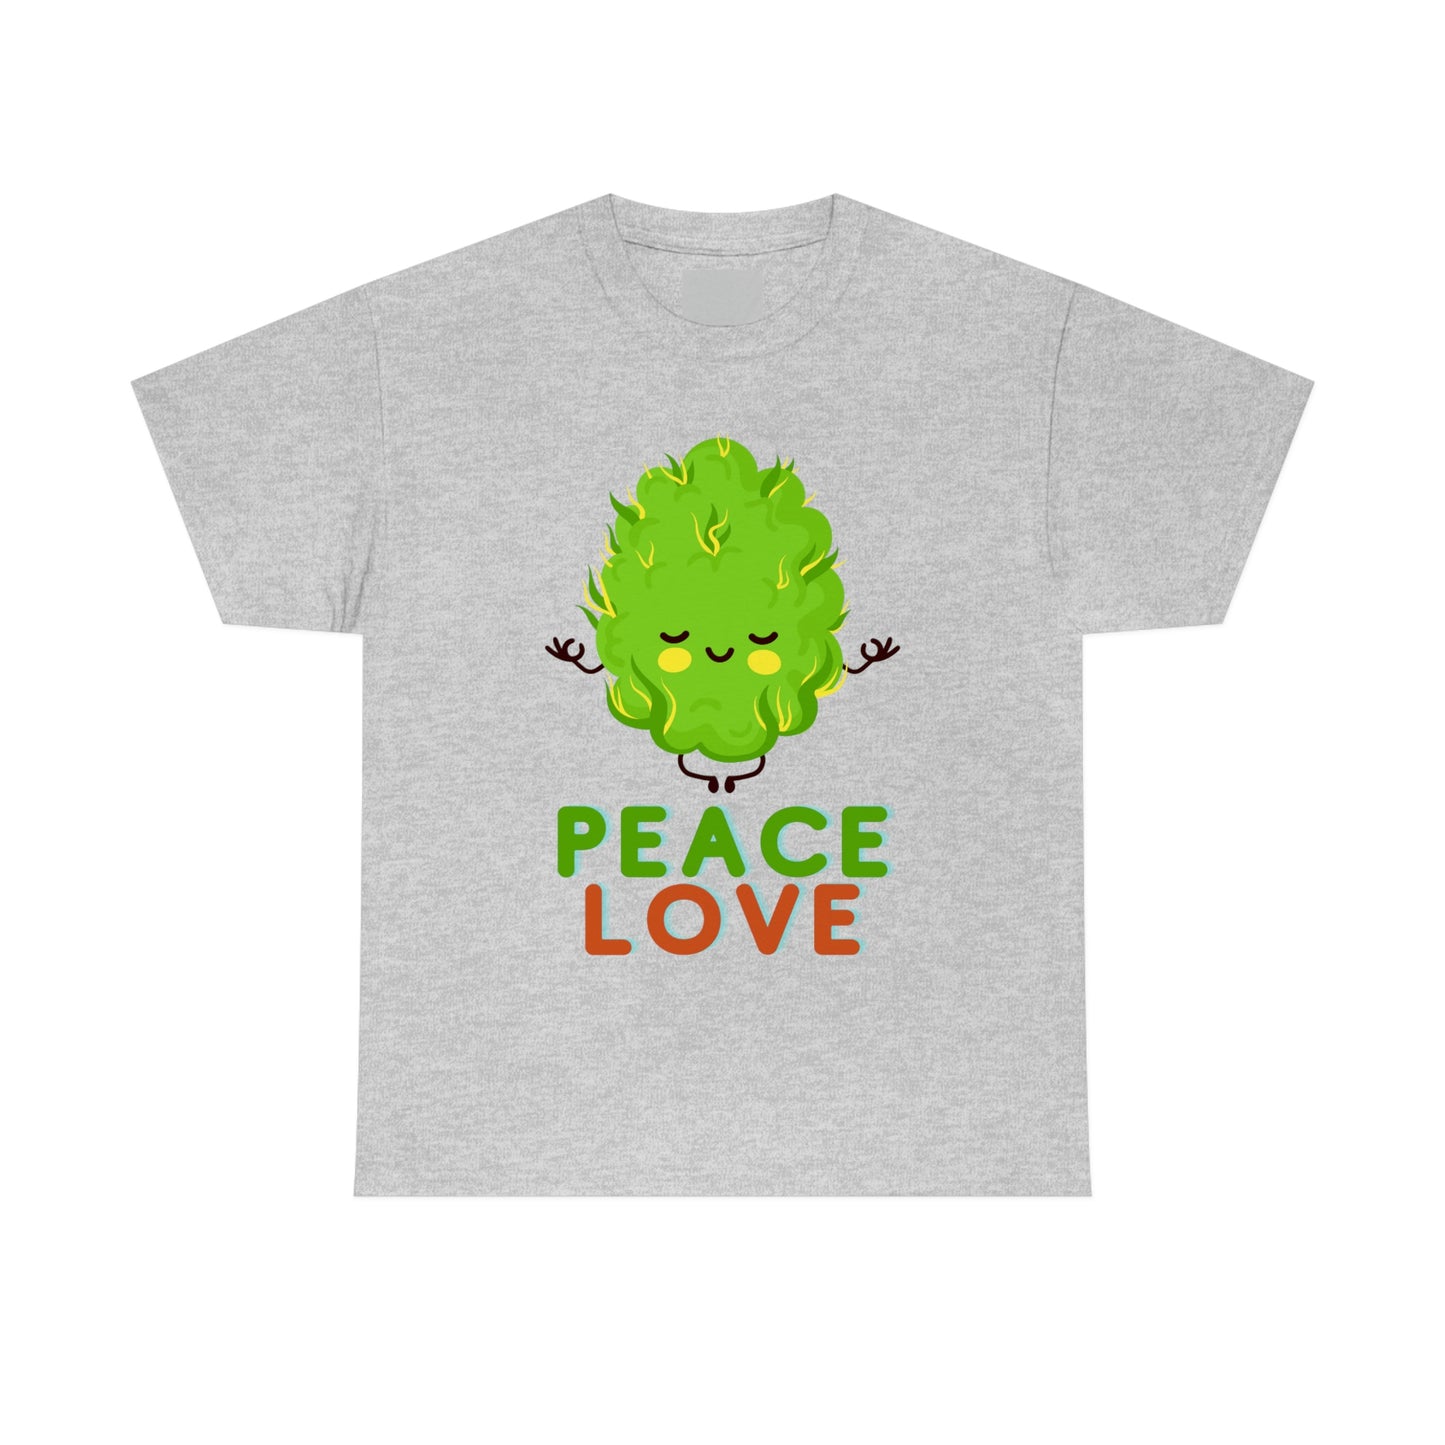 a Peace and Love Tee with a cartoon character.